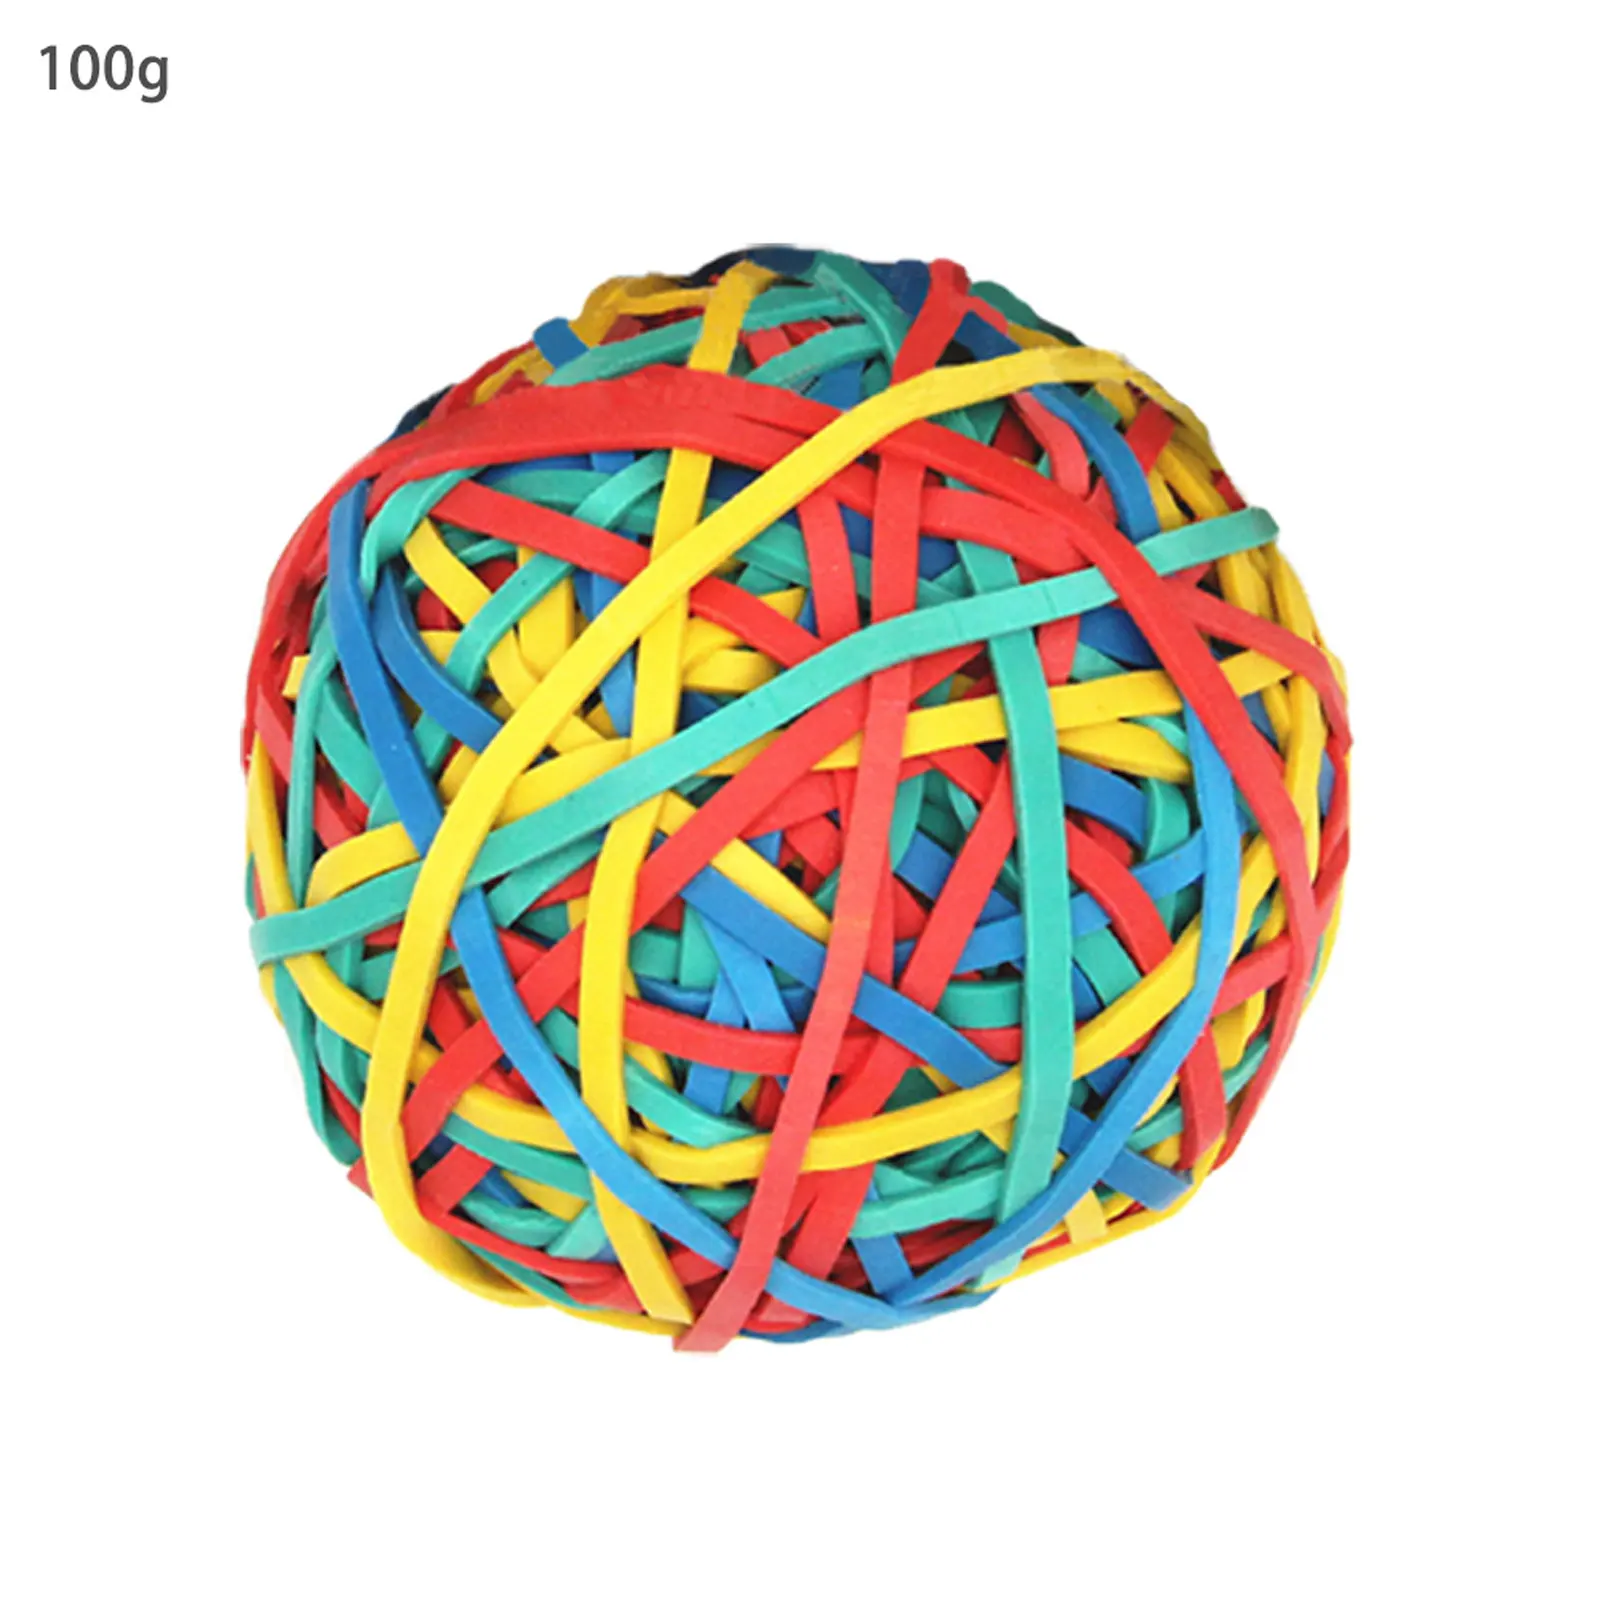 

Round Document Organizing Durable Stocking Filler Elastic Loops Stretchable DIY Arts Crafts Stationery Holder Rubber Band Ball